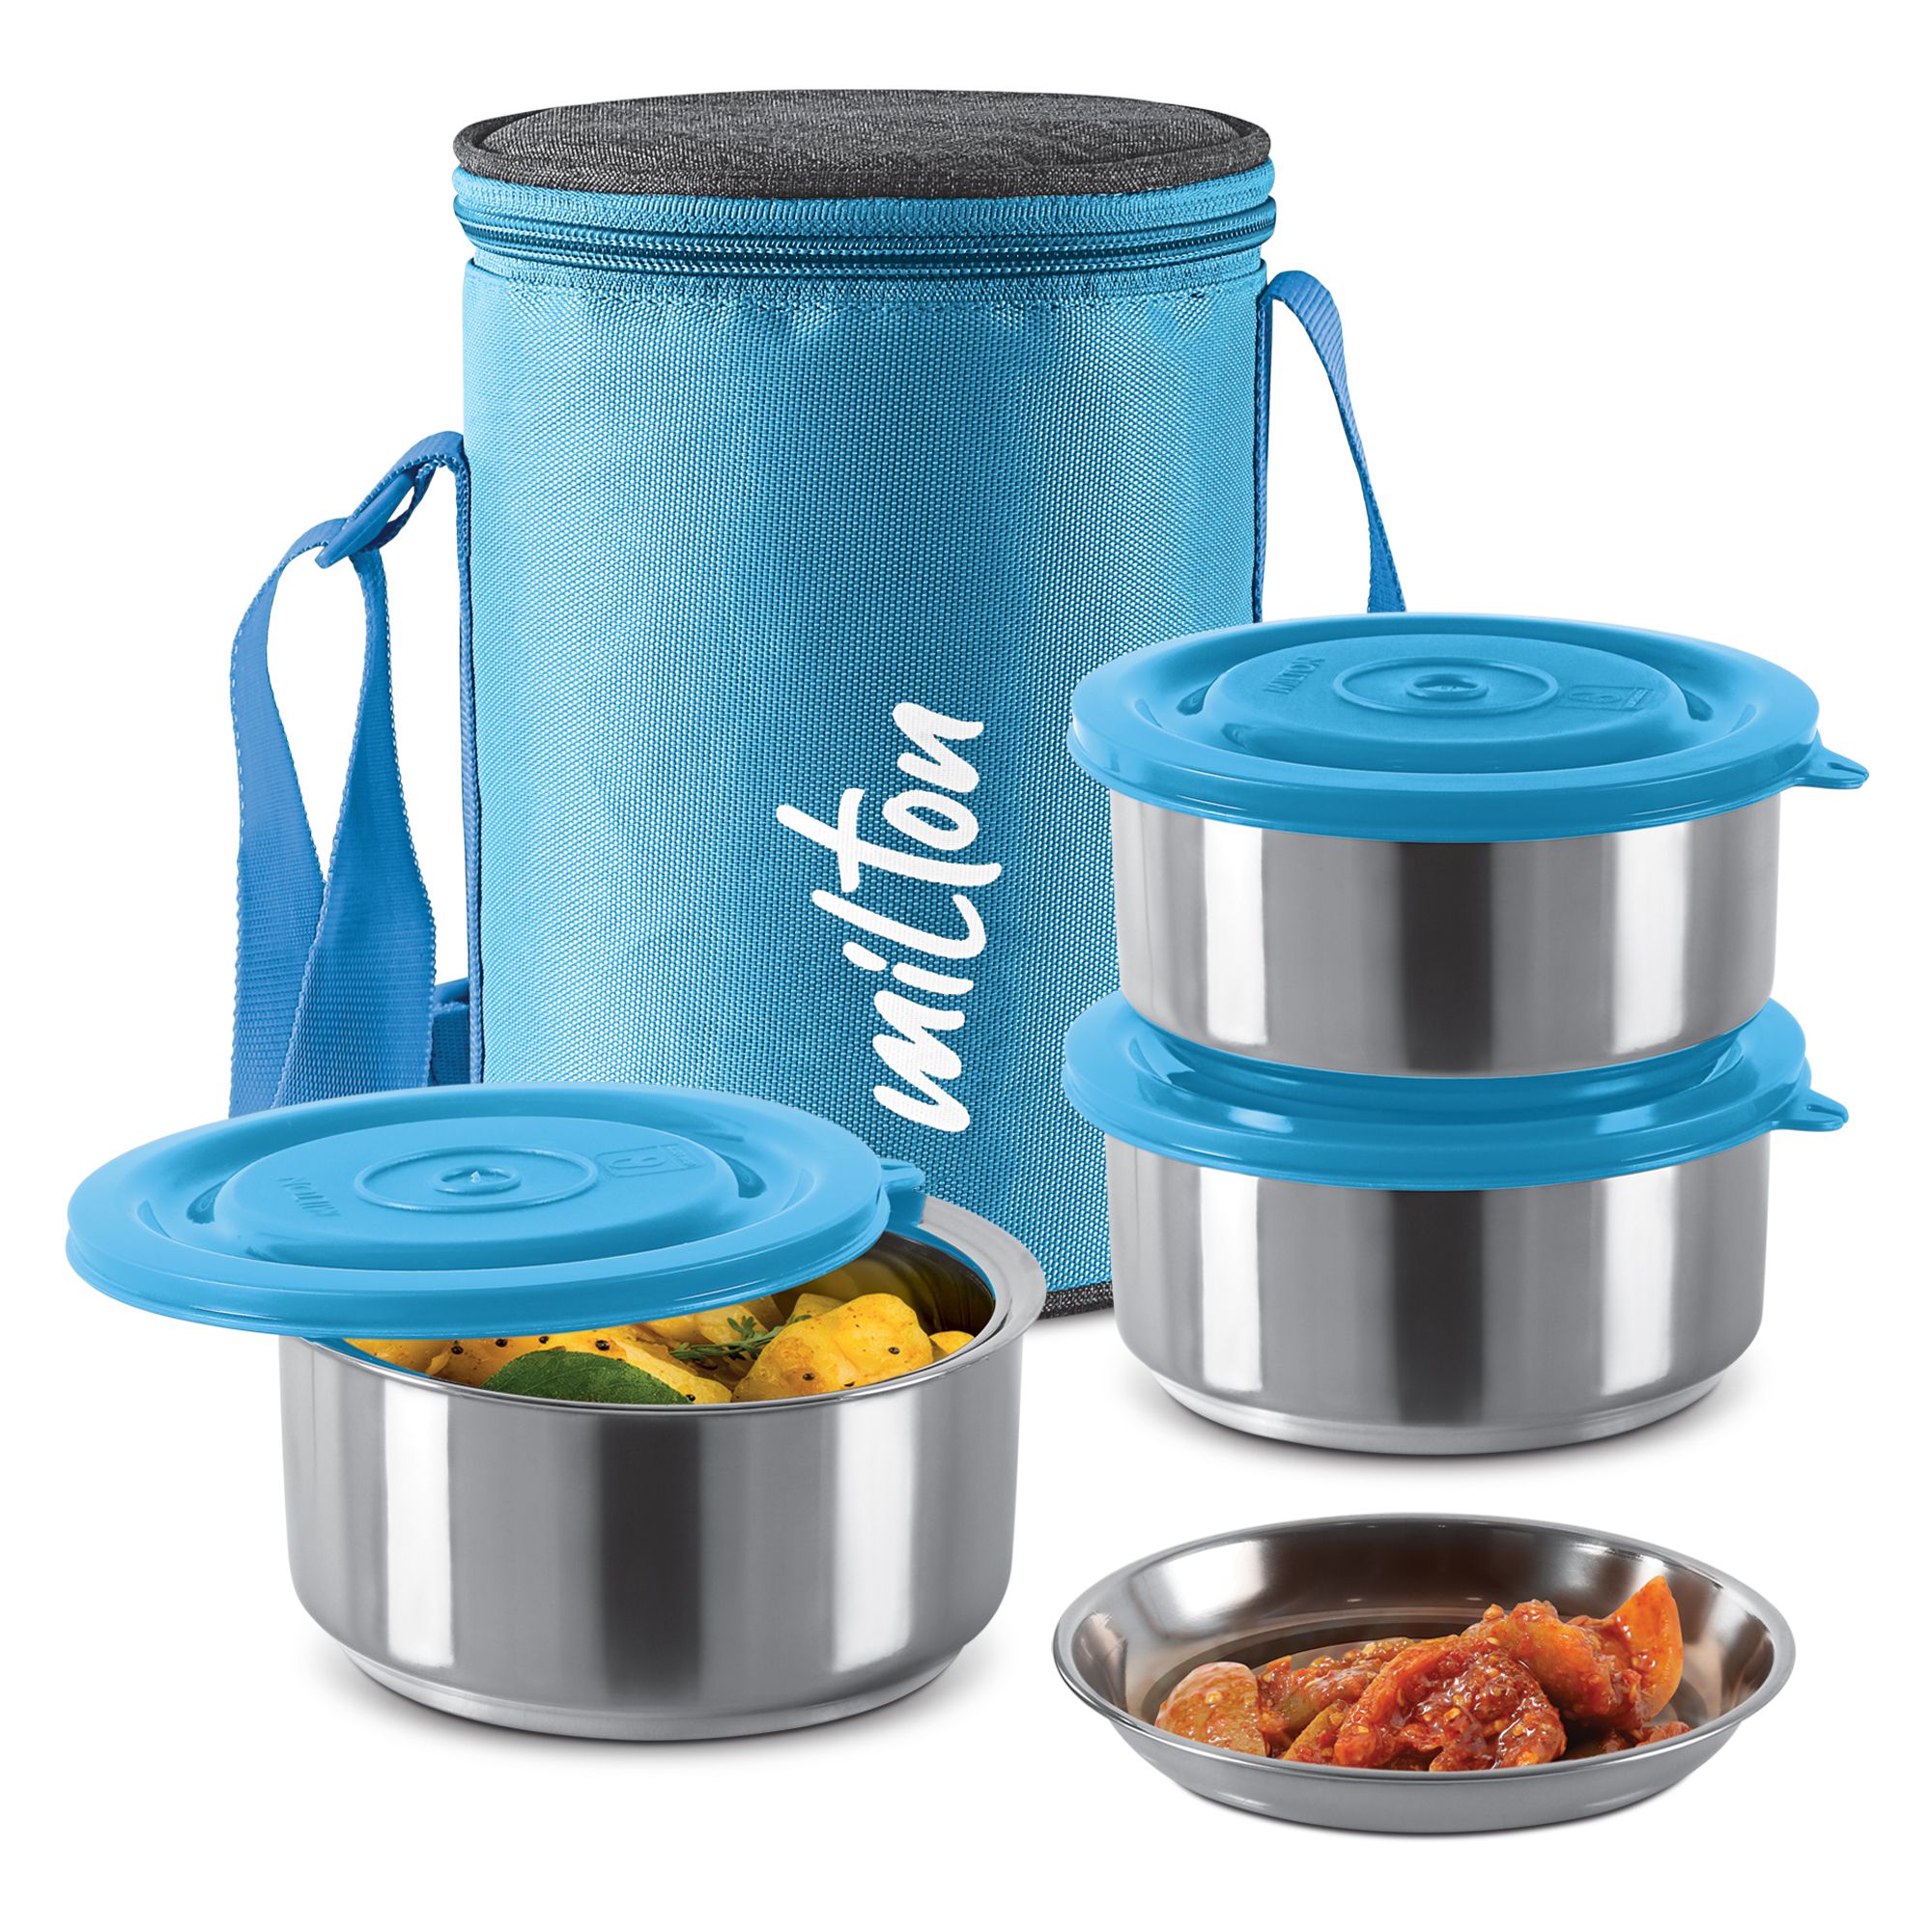     			Milton Ambition 3 Stainless Steel Tiffin, 3 Containers (300 ml Each with Jacket) Blue